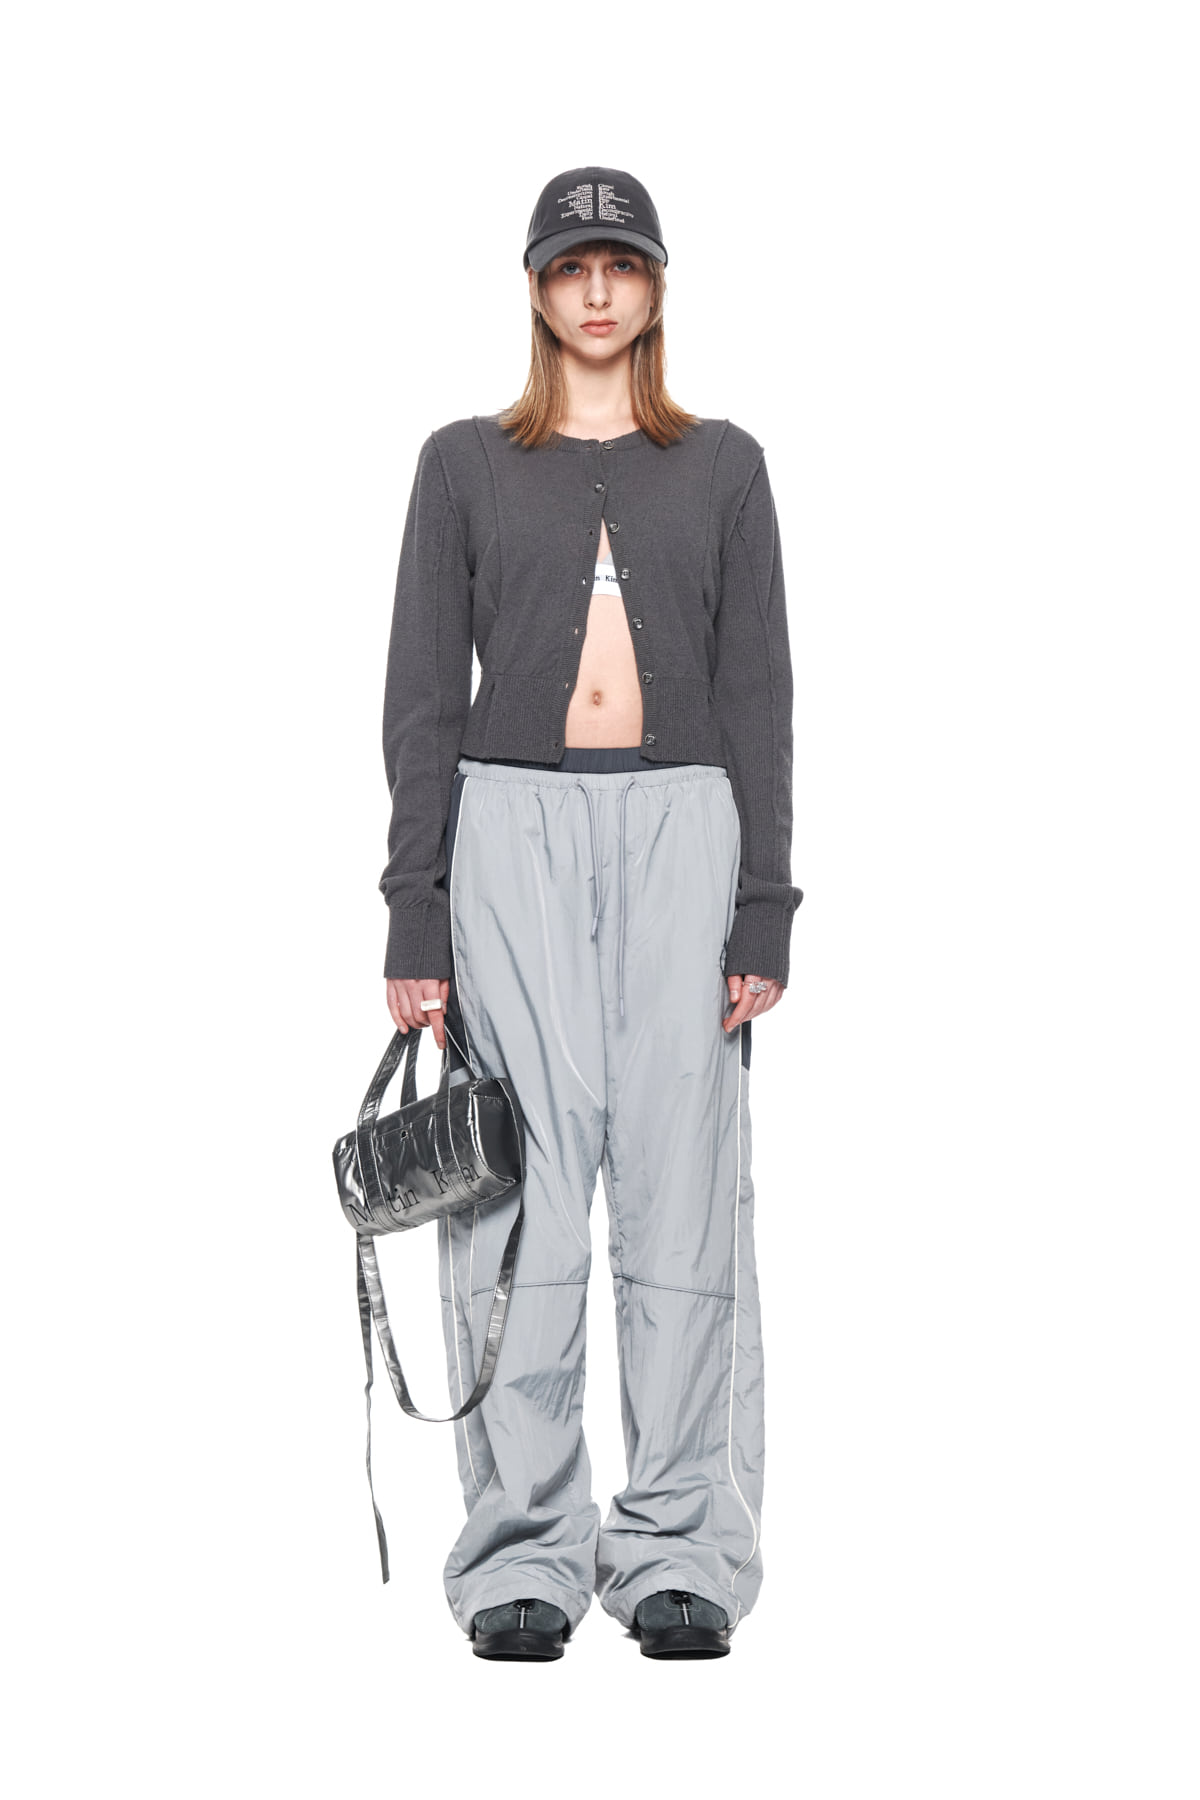 SIDE PIPING TRACK PANTS IN GREY